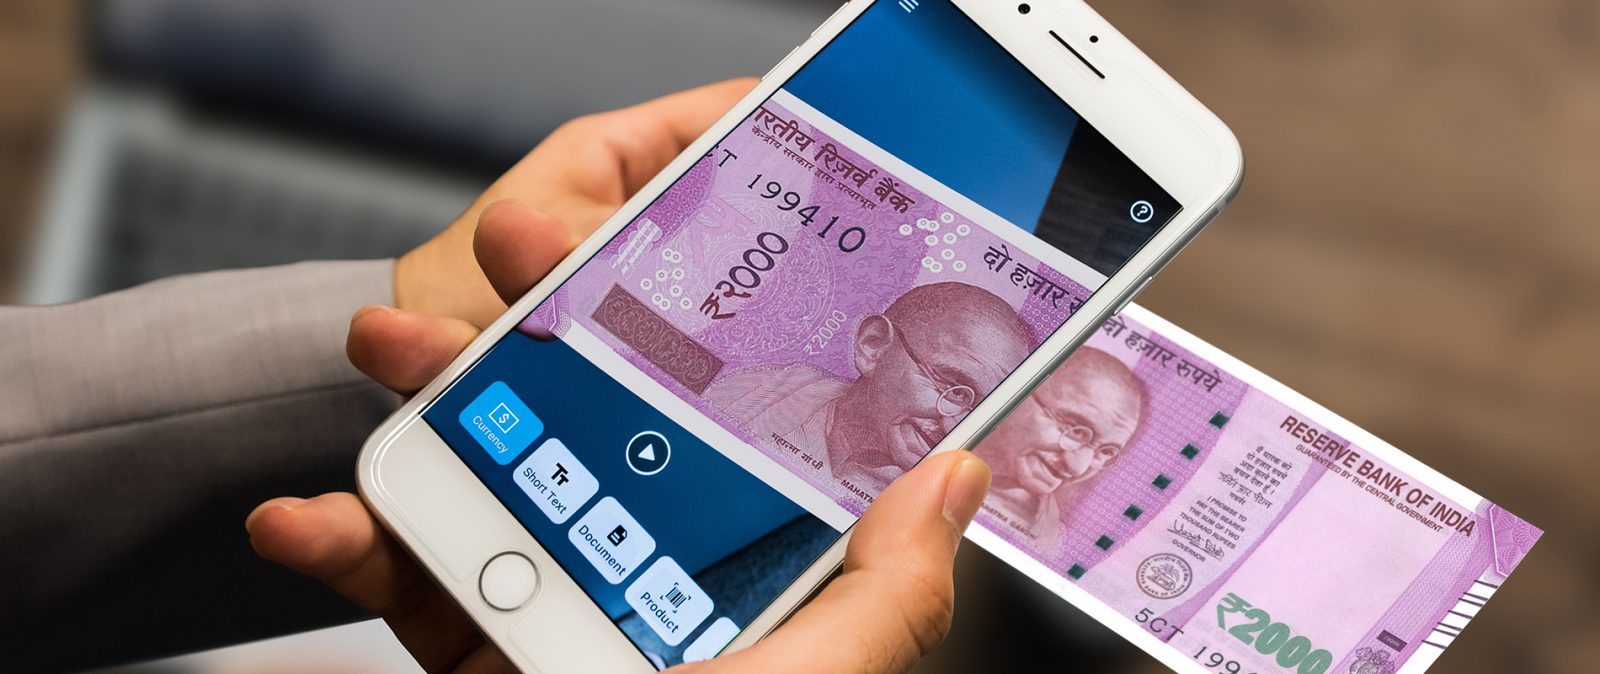 iPhone with Seeing AI app scanning a 2000 rupee note